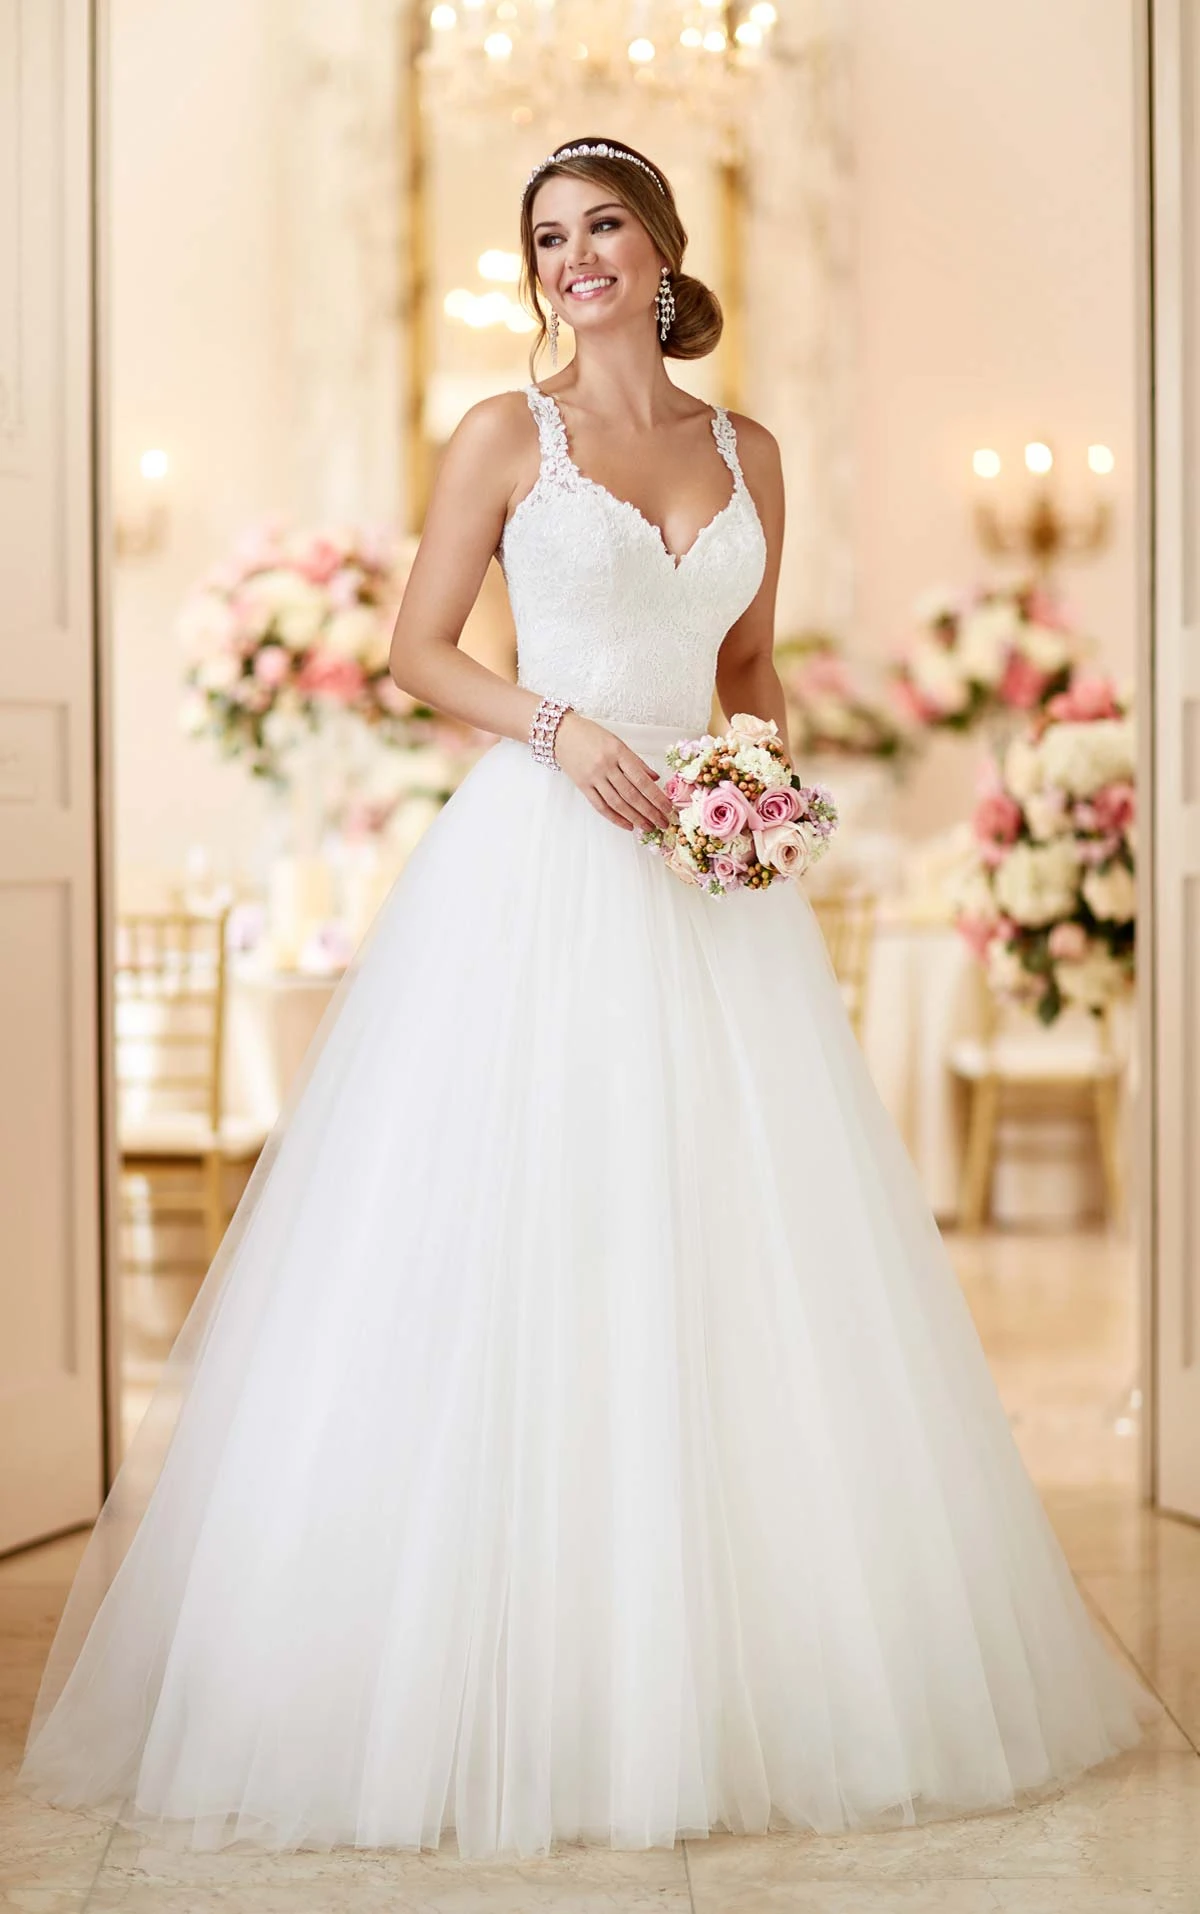 convertible wedding gown